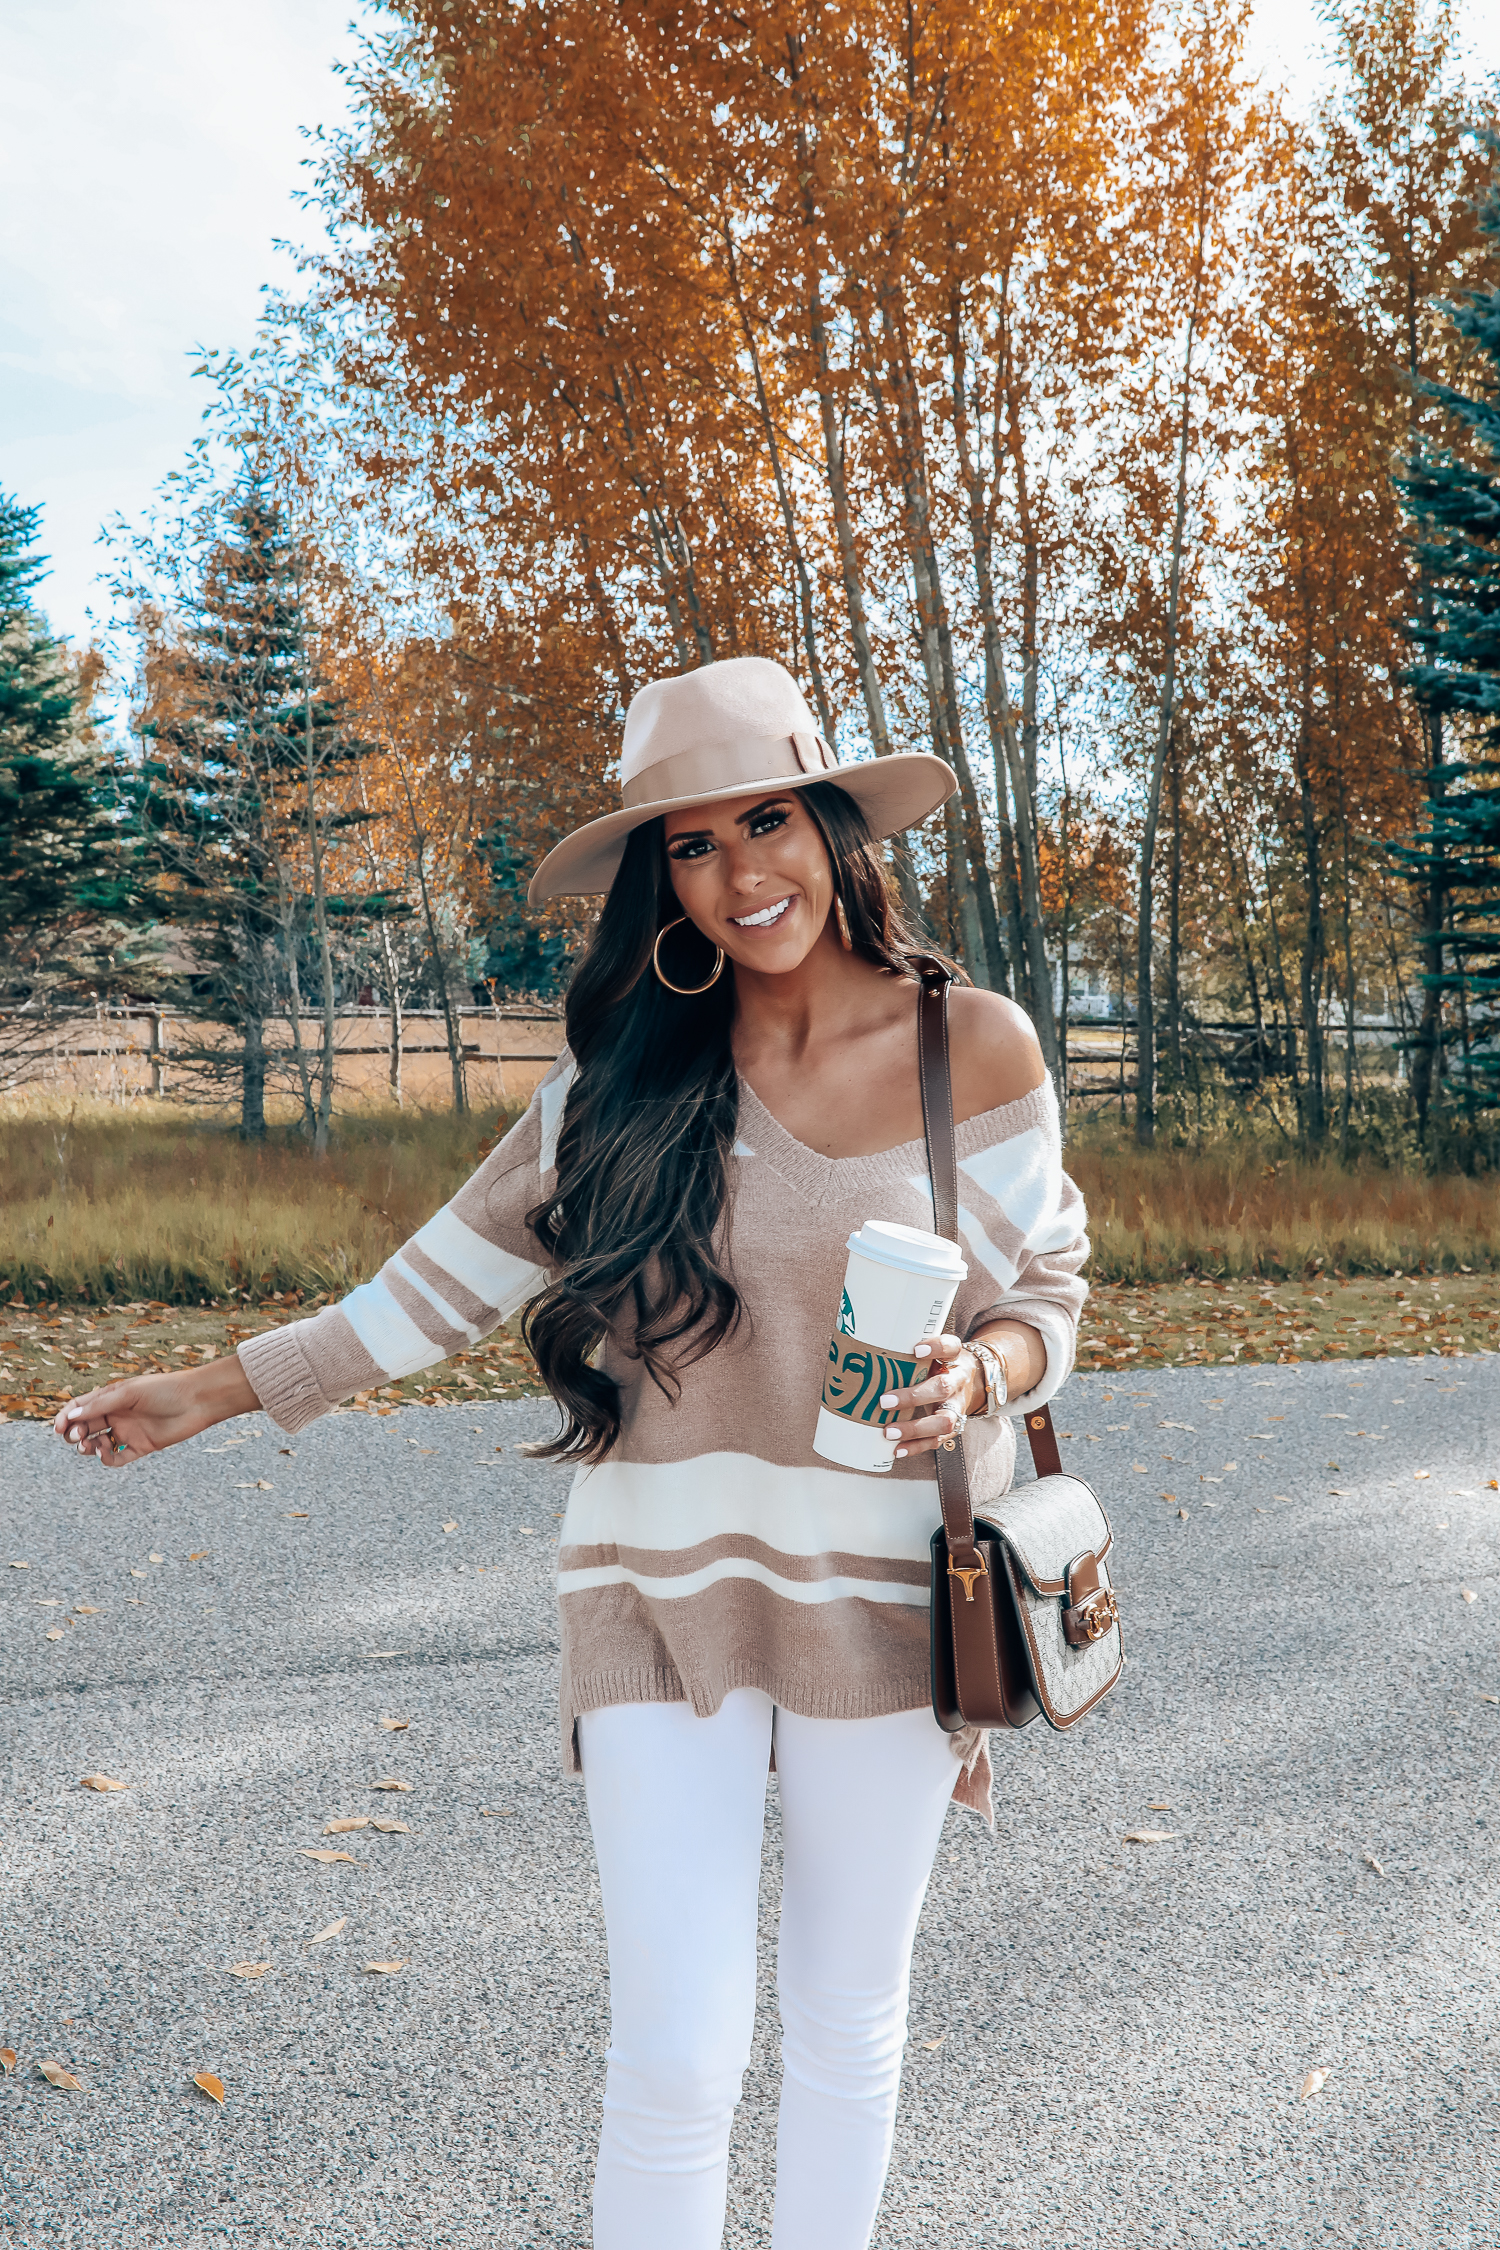 Rag and Bone White Jeans style for Fall by top US fashion blog, The Sweetest Thing: image of a woman wearing Rag and Bone white denim jeans, a Red Dress Boutique off the shoulder striped sweater, Gianni Bini boots, Gucci 1955 shoulder bag, Brixton Panama hat, Rolex watch, Cartier bracelets, Argento Vivo earrings, and a Free People ring | fall fashion outfits pinterest 2019, gucci vintage 1955 bag, fall outfits white denim, red dress boutique sweater, brixton hats-5